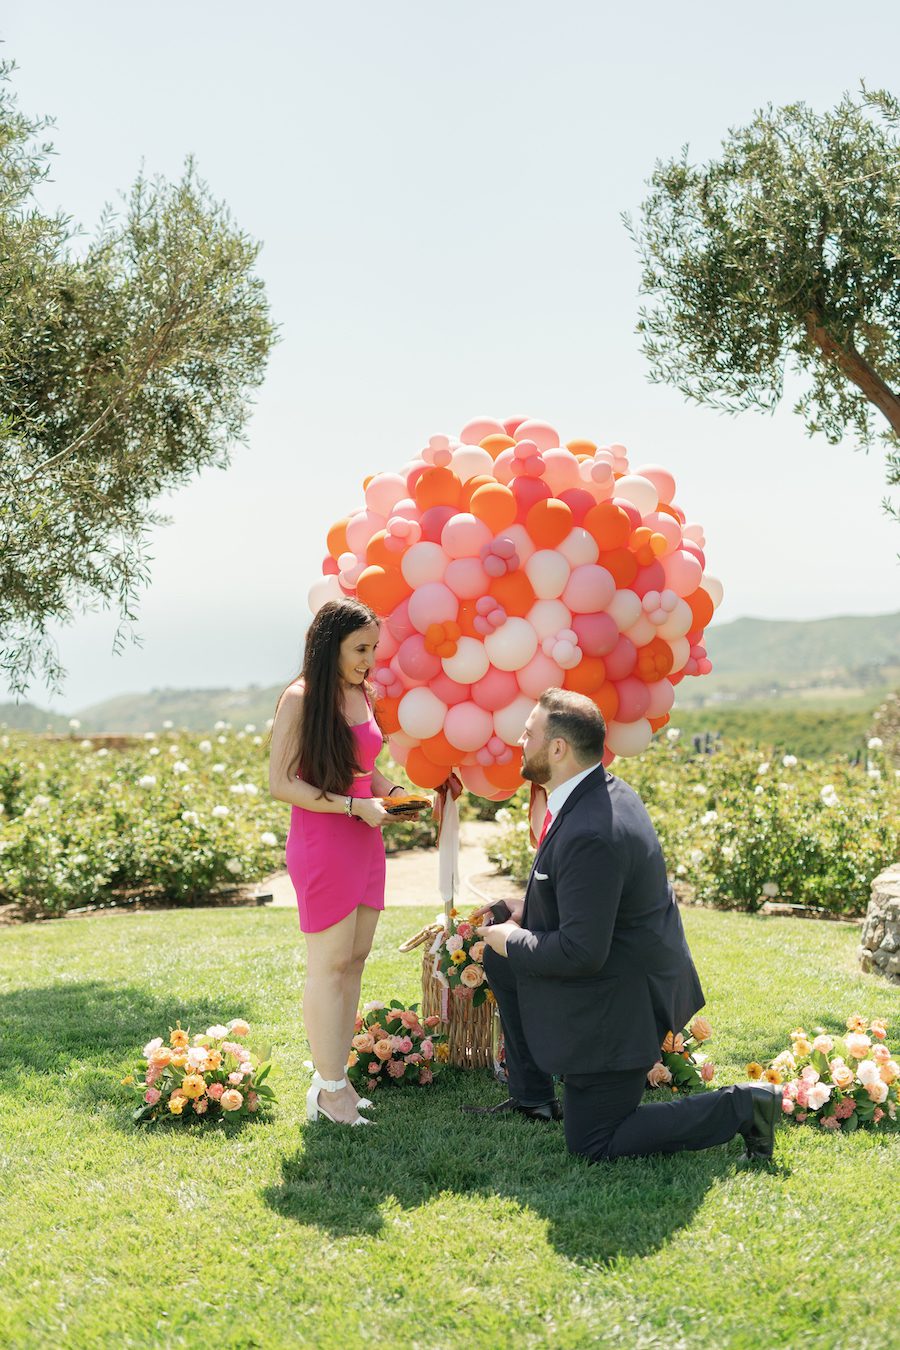 Hot air balloon inspired proposal in Malibu CA down on one knee